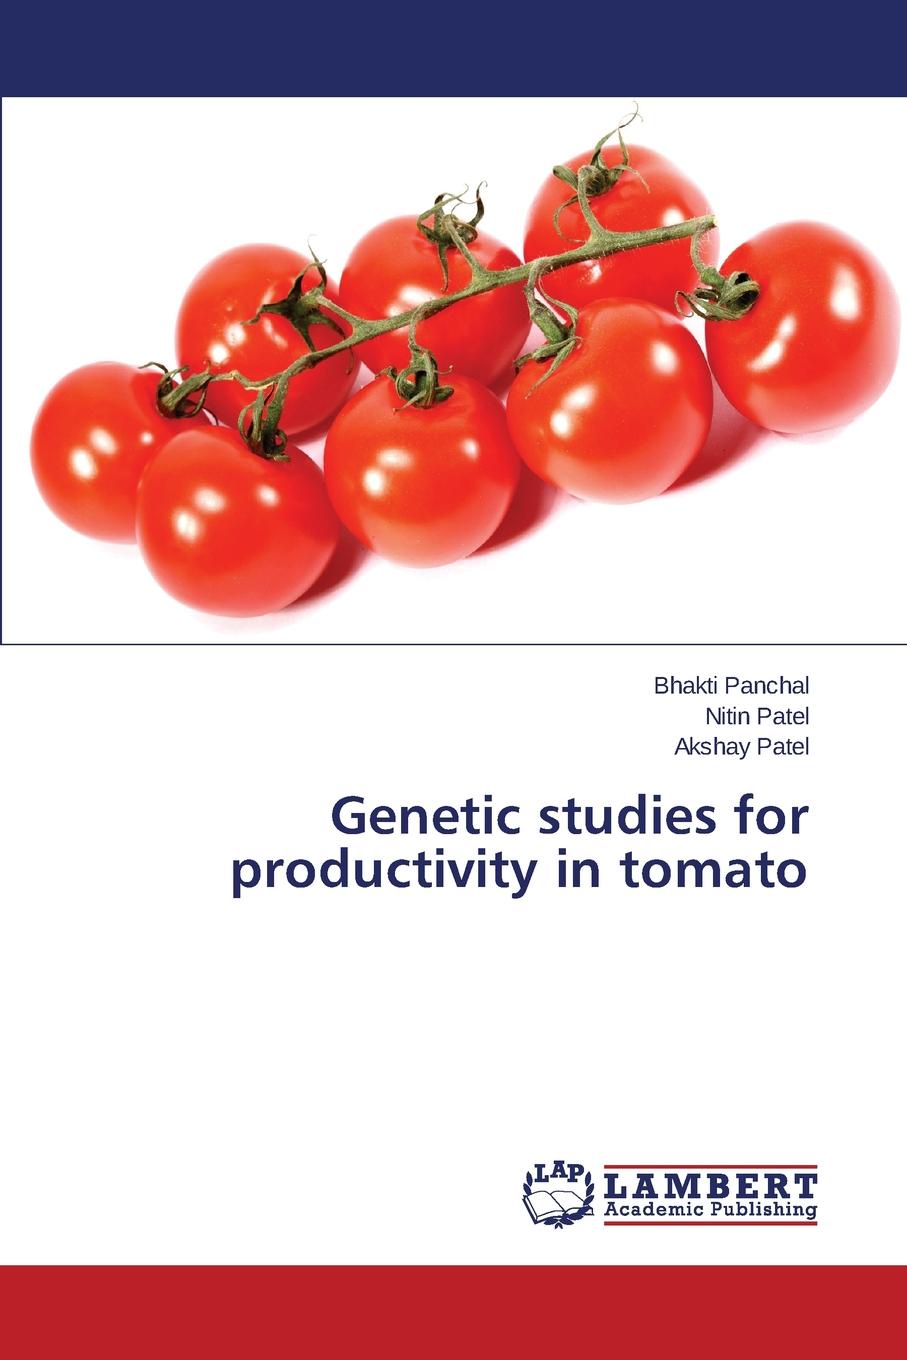 Genetic studies for productivity in tomato